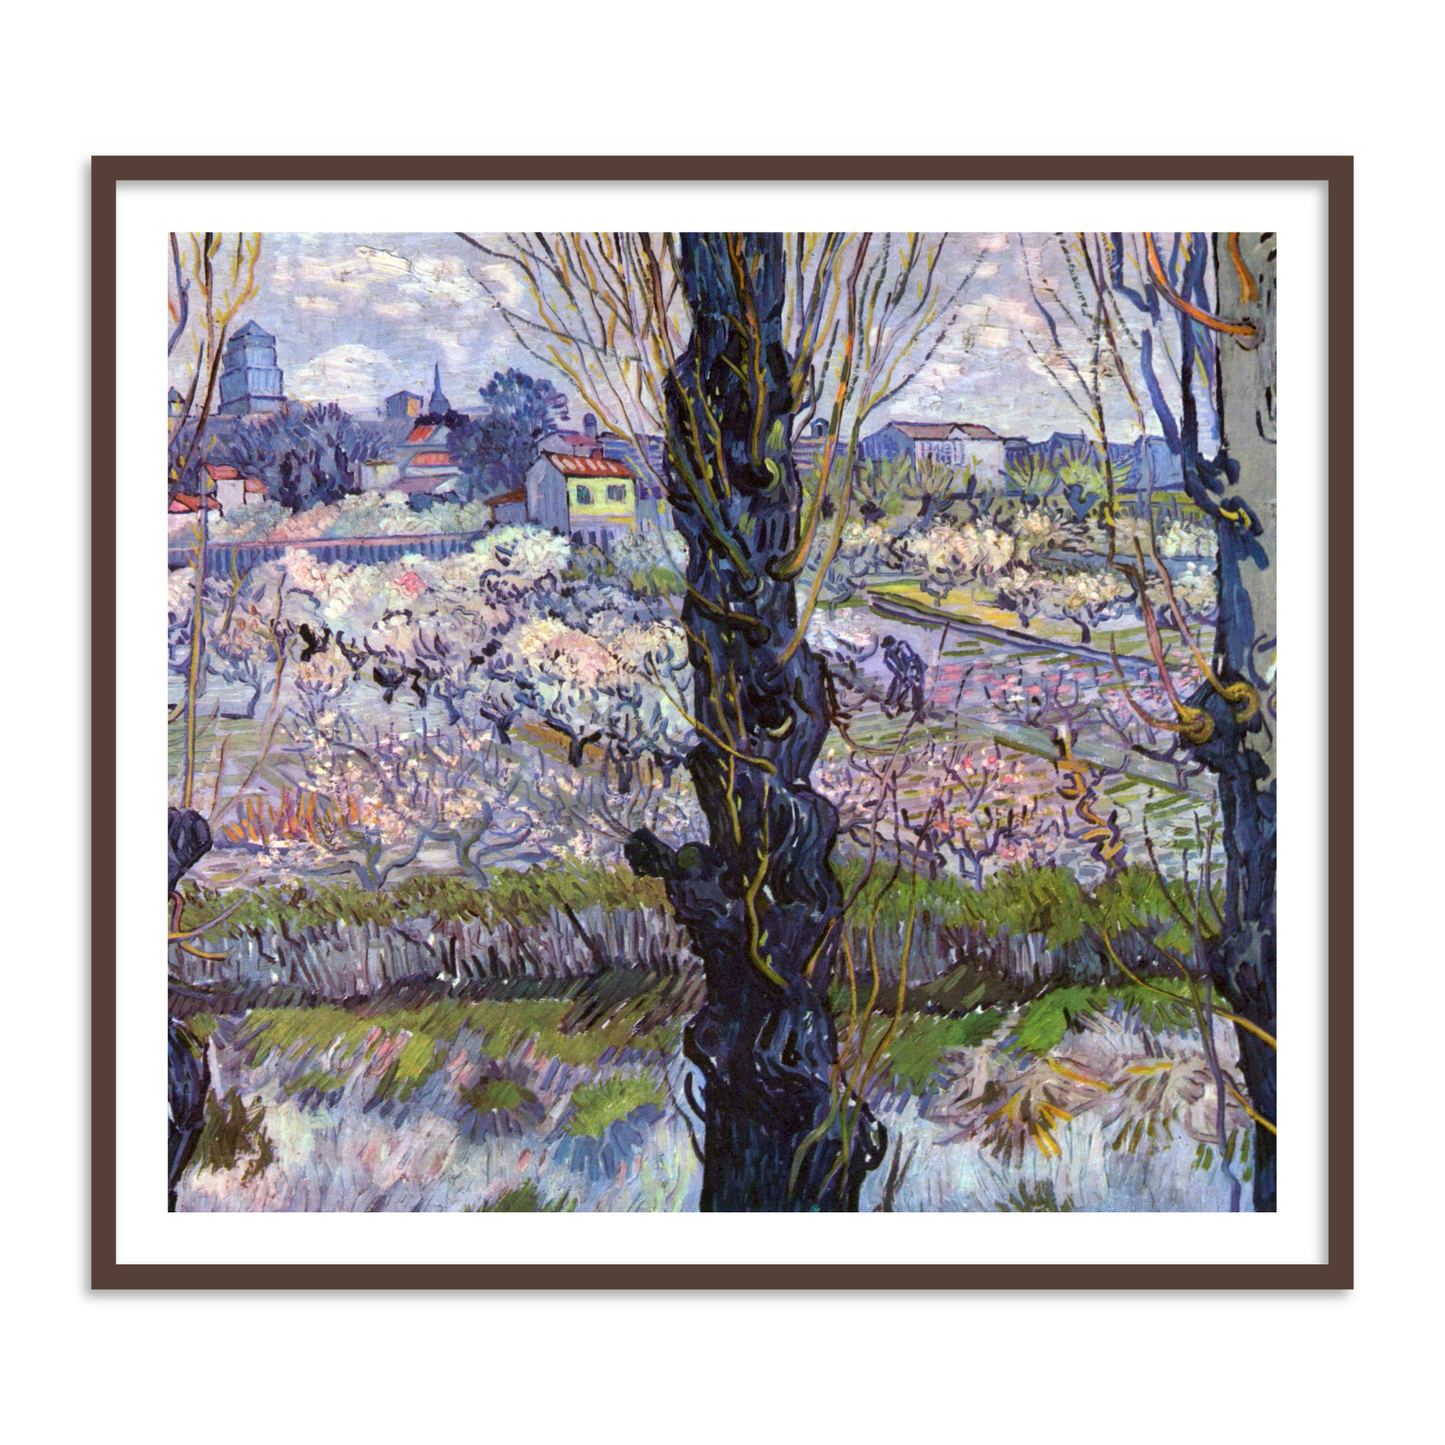 View of Arles, Flowering Orchards by Vincent Van Gogh Famous Painting Wall Art